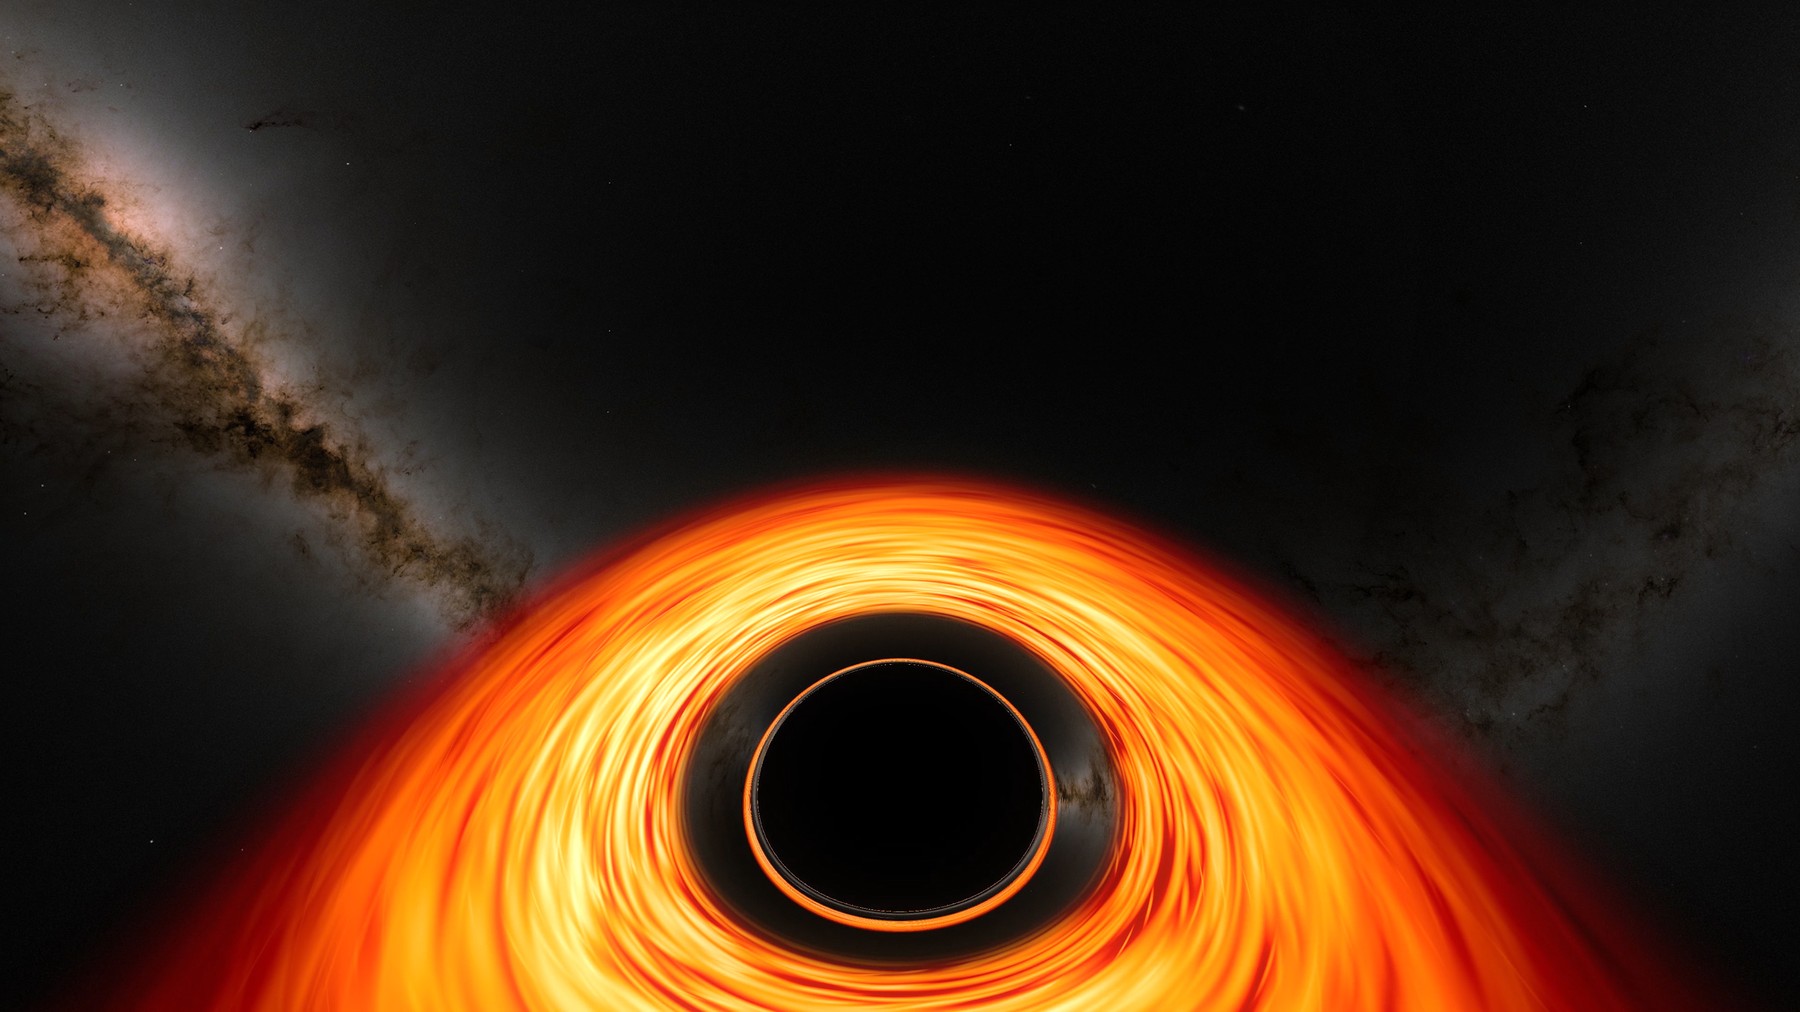 This is what would happen if we jumped into a black hole, and from there there is no return, according to NASA